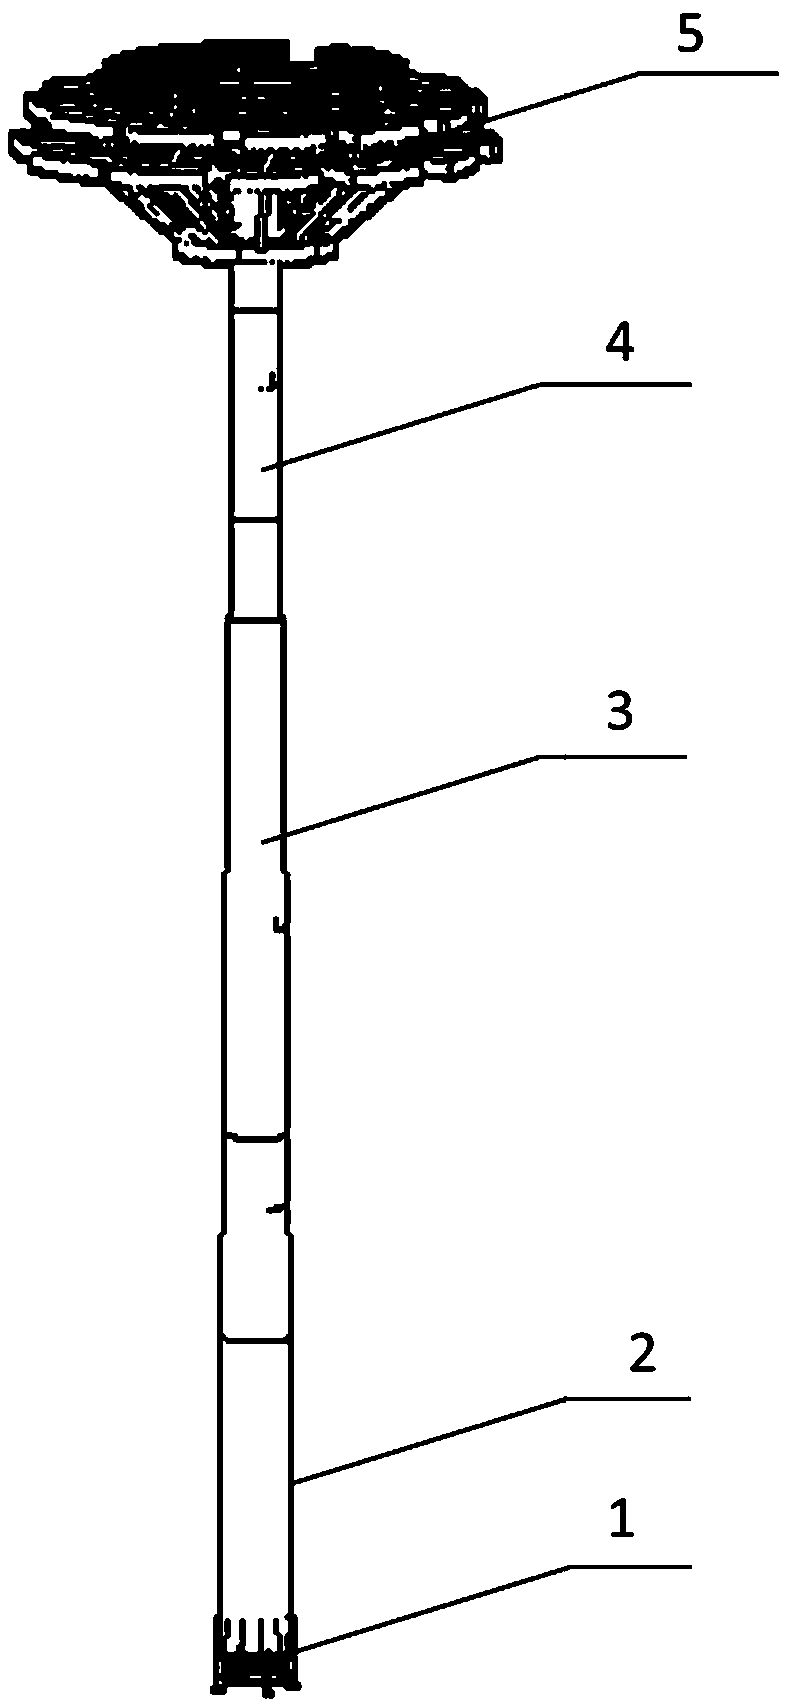 A single-column flower-shaped tower and its construction method